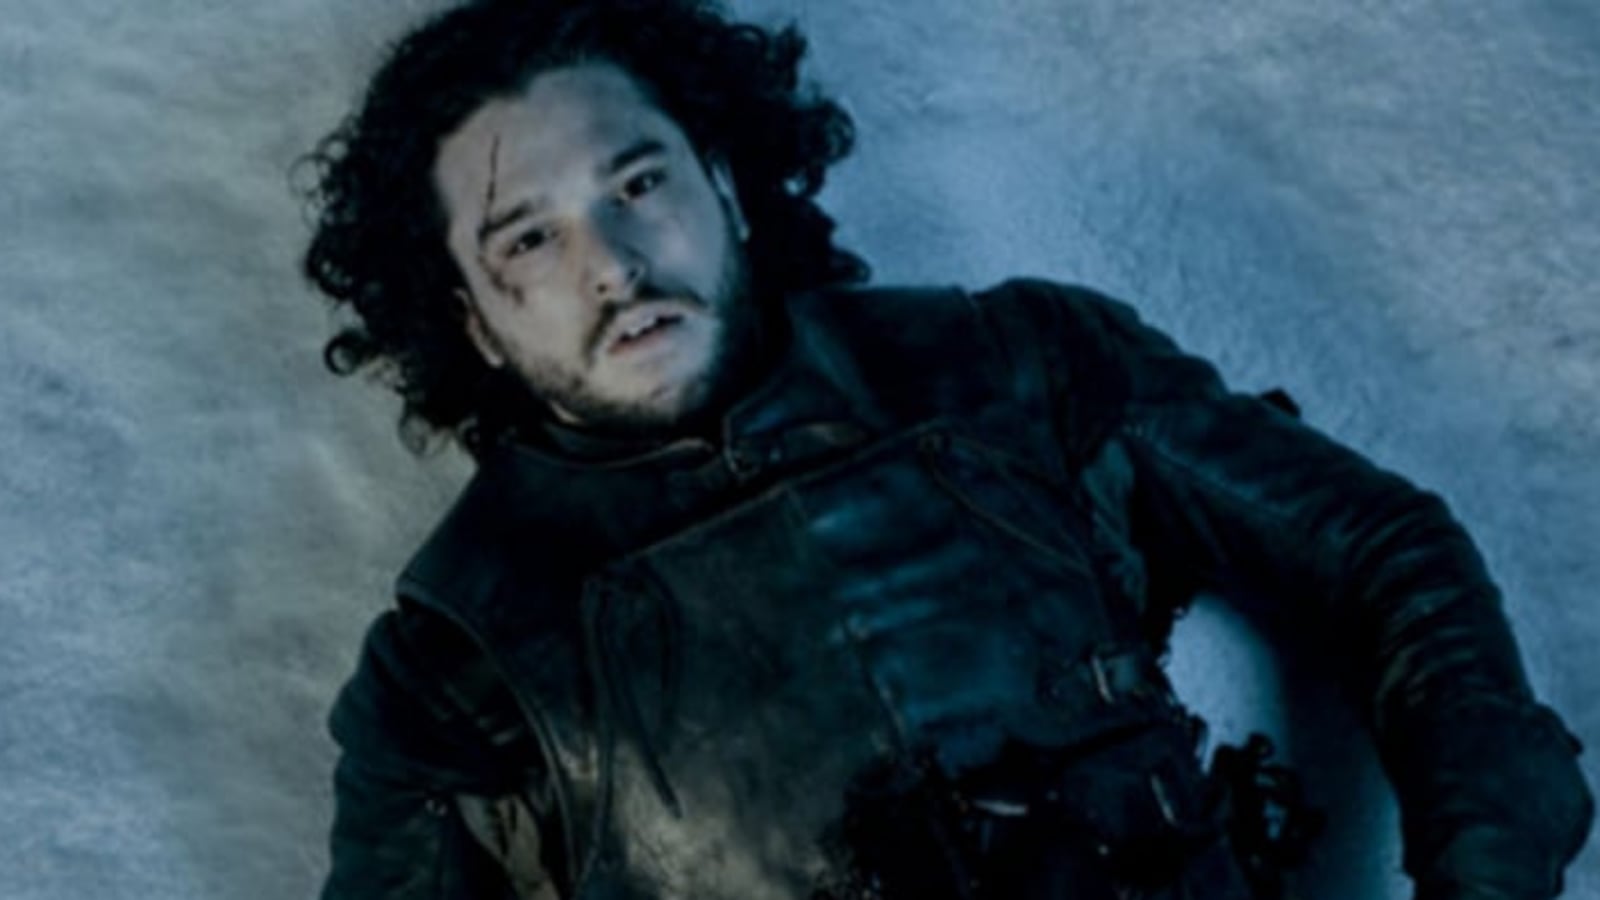 Is Jon Snow coming back? Game of Thrones showrunners discuss potential spin-off | Hollywood